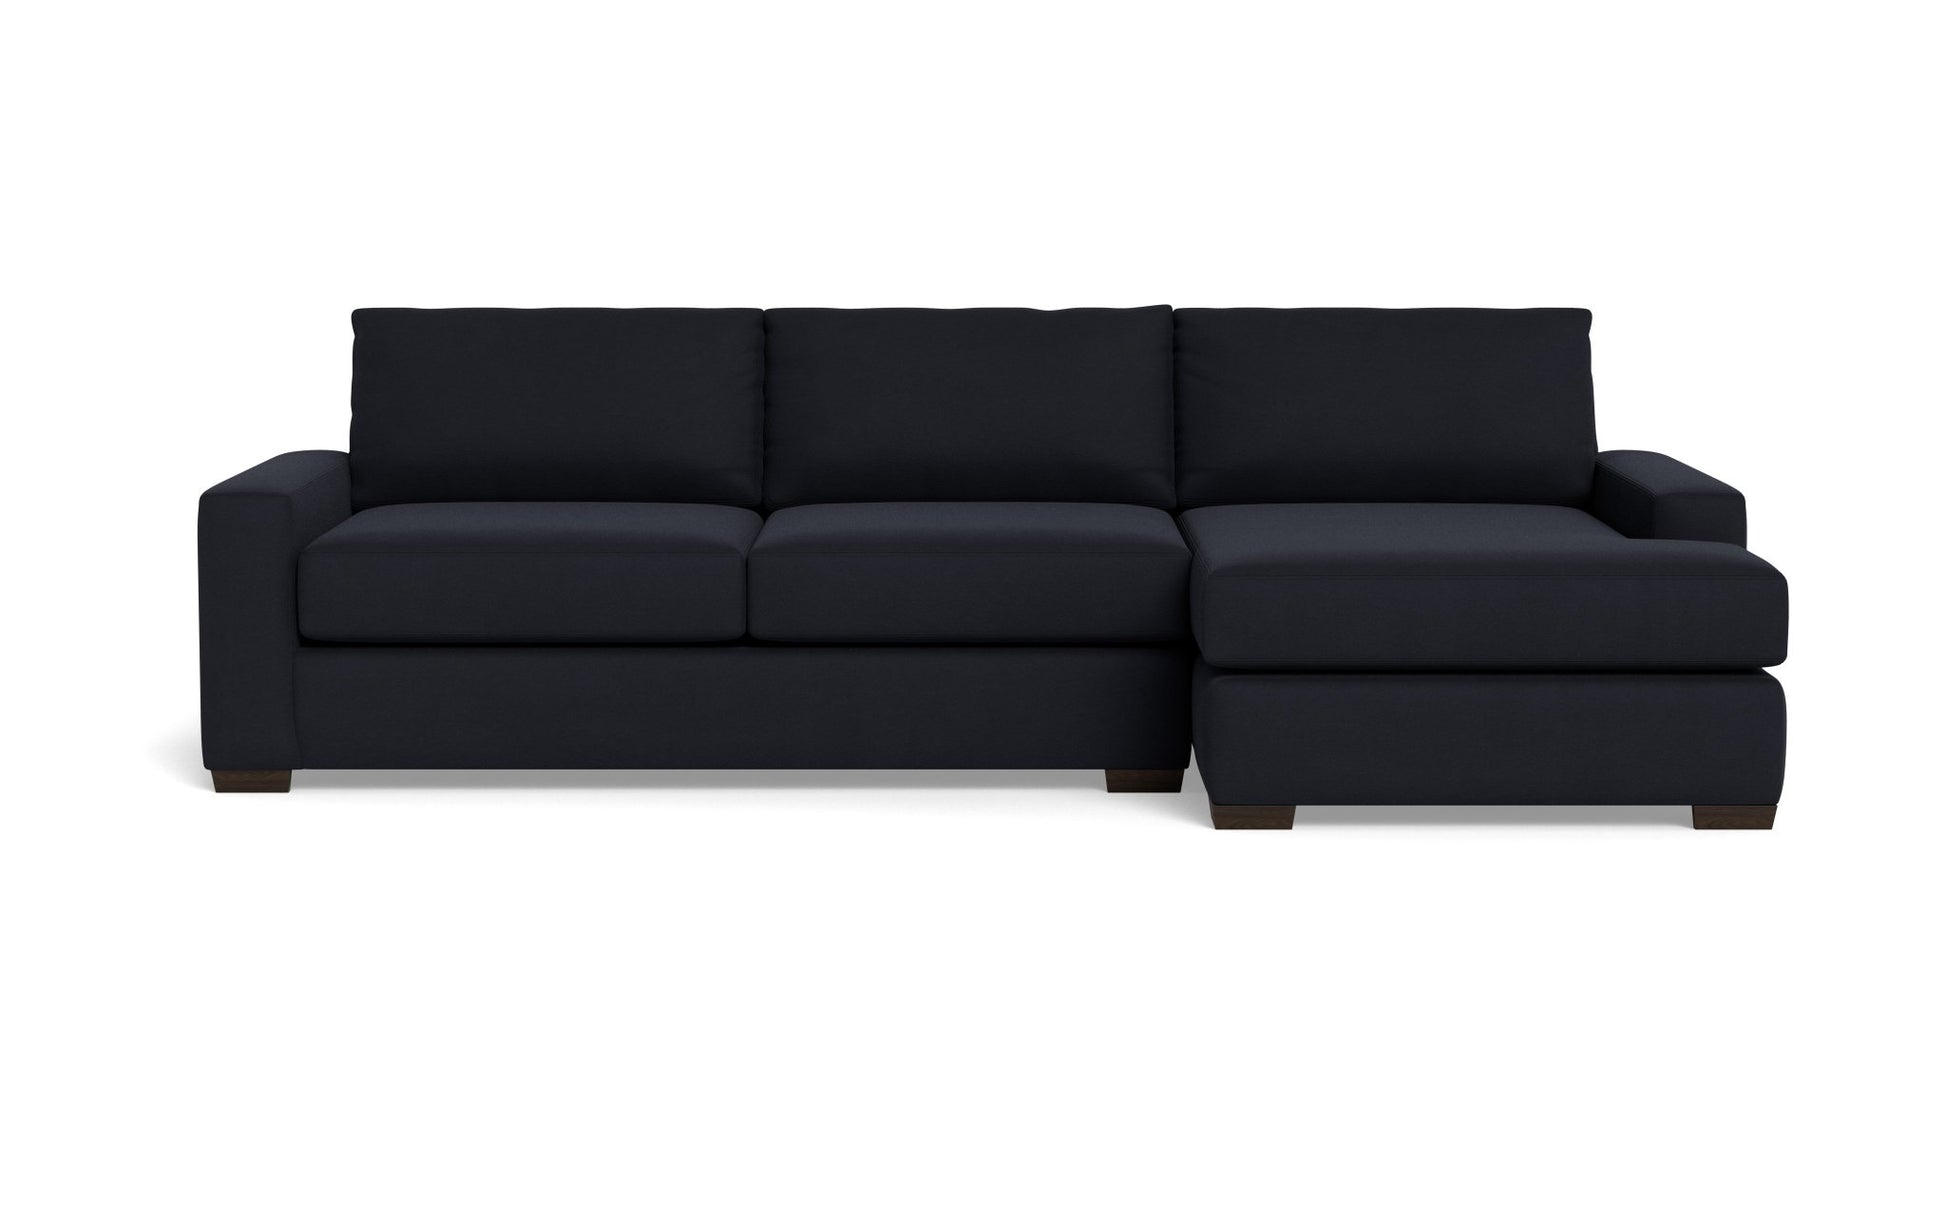 Mas Mesa Right Chaise Sectional - Bella Black